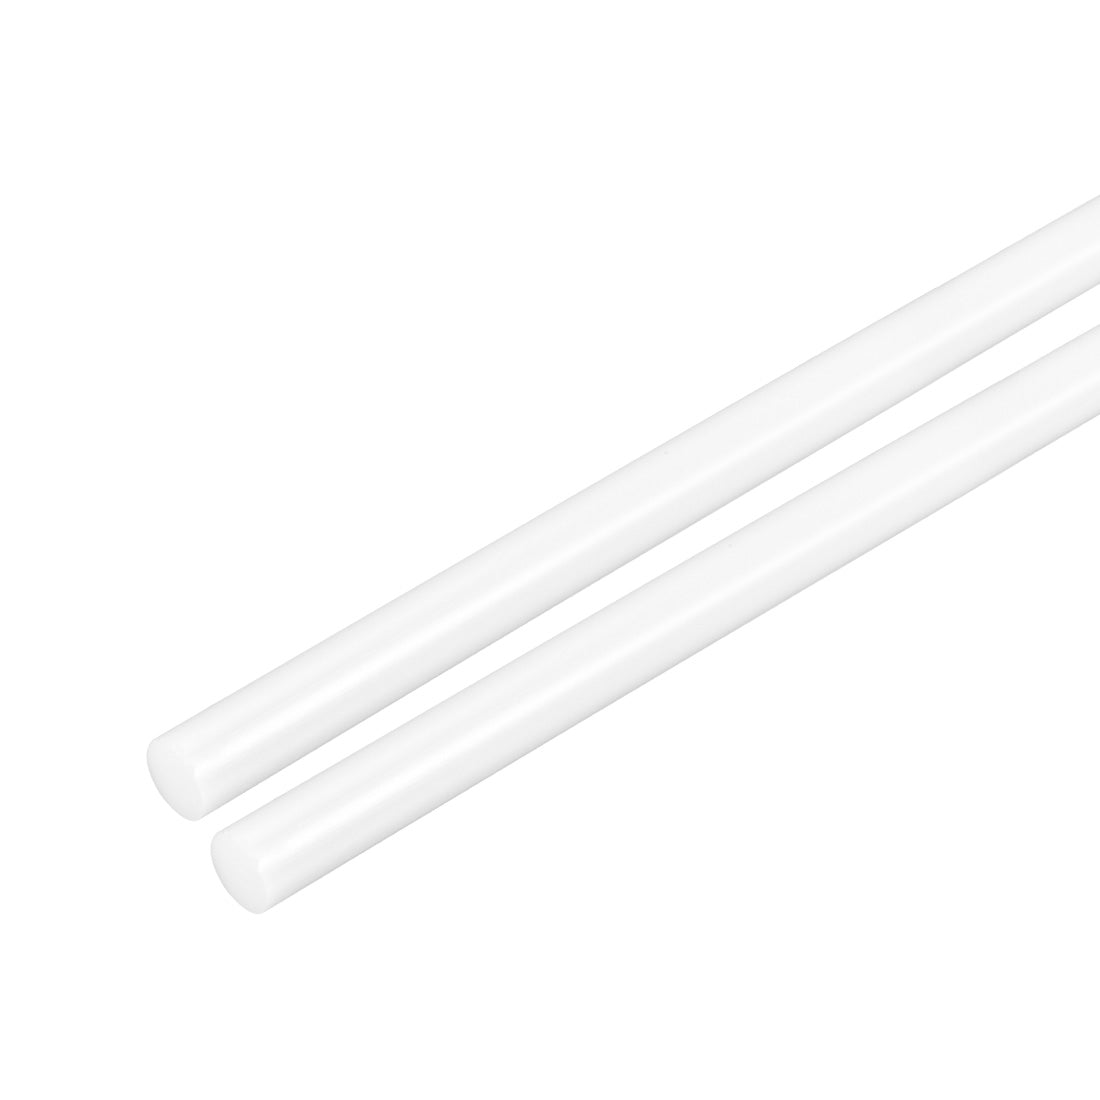 uxcell Uxcell Plastic Round Rod,4mm Dia 50cm White Engineering Plastic Round Bar 2pcs